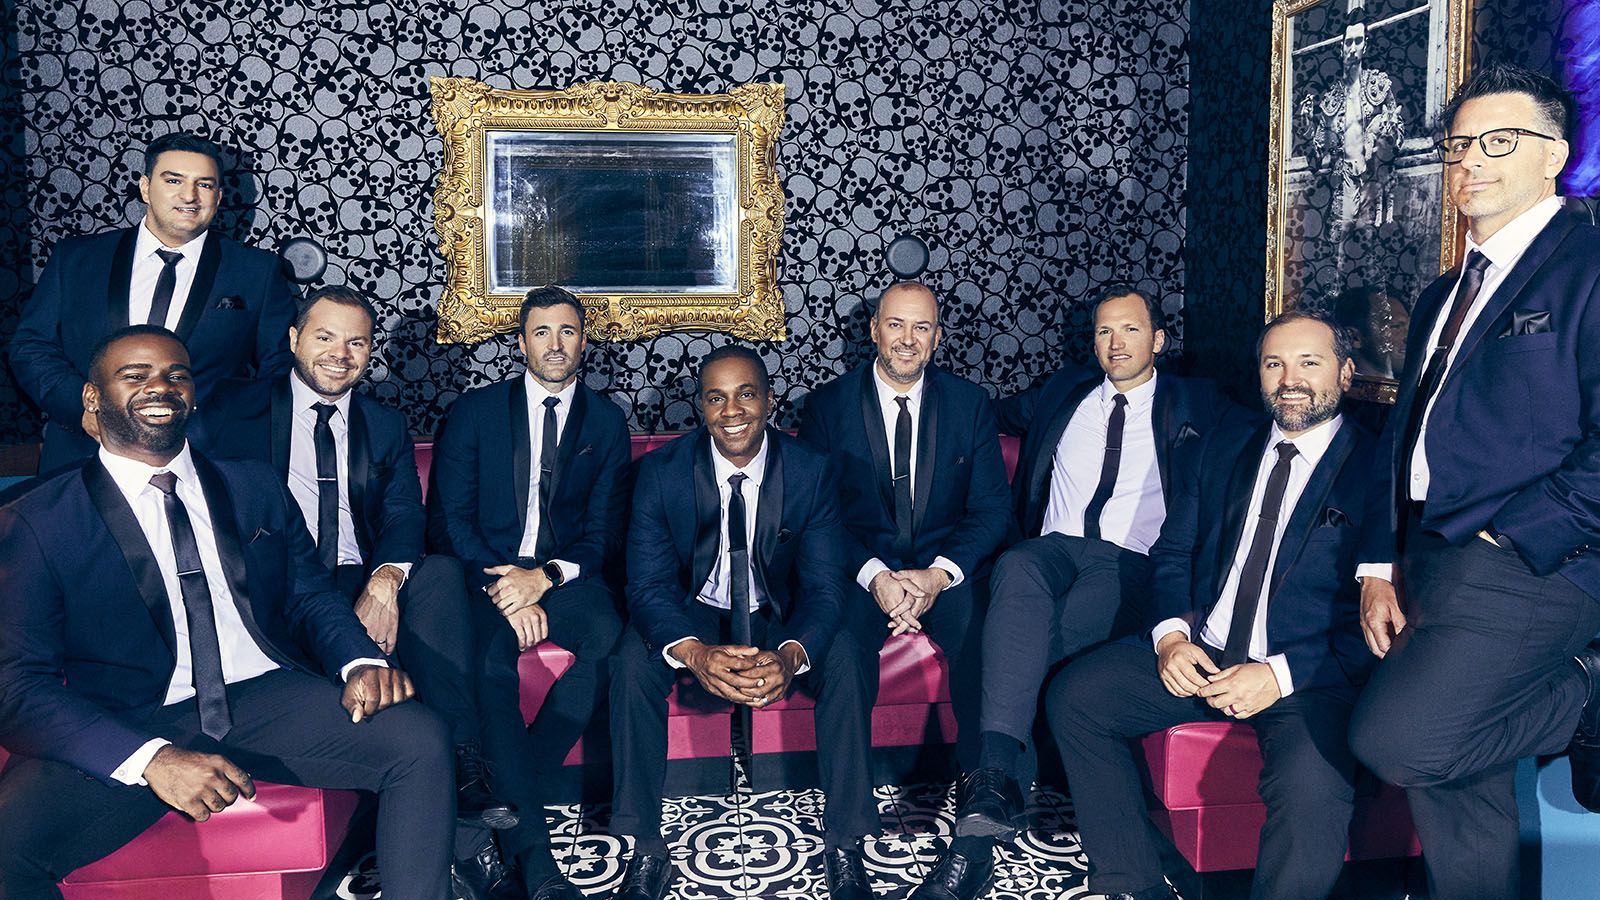 Straight No Chaser will be Embassy Theatre on Dec. 14.